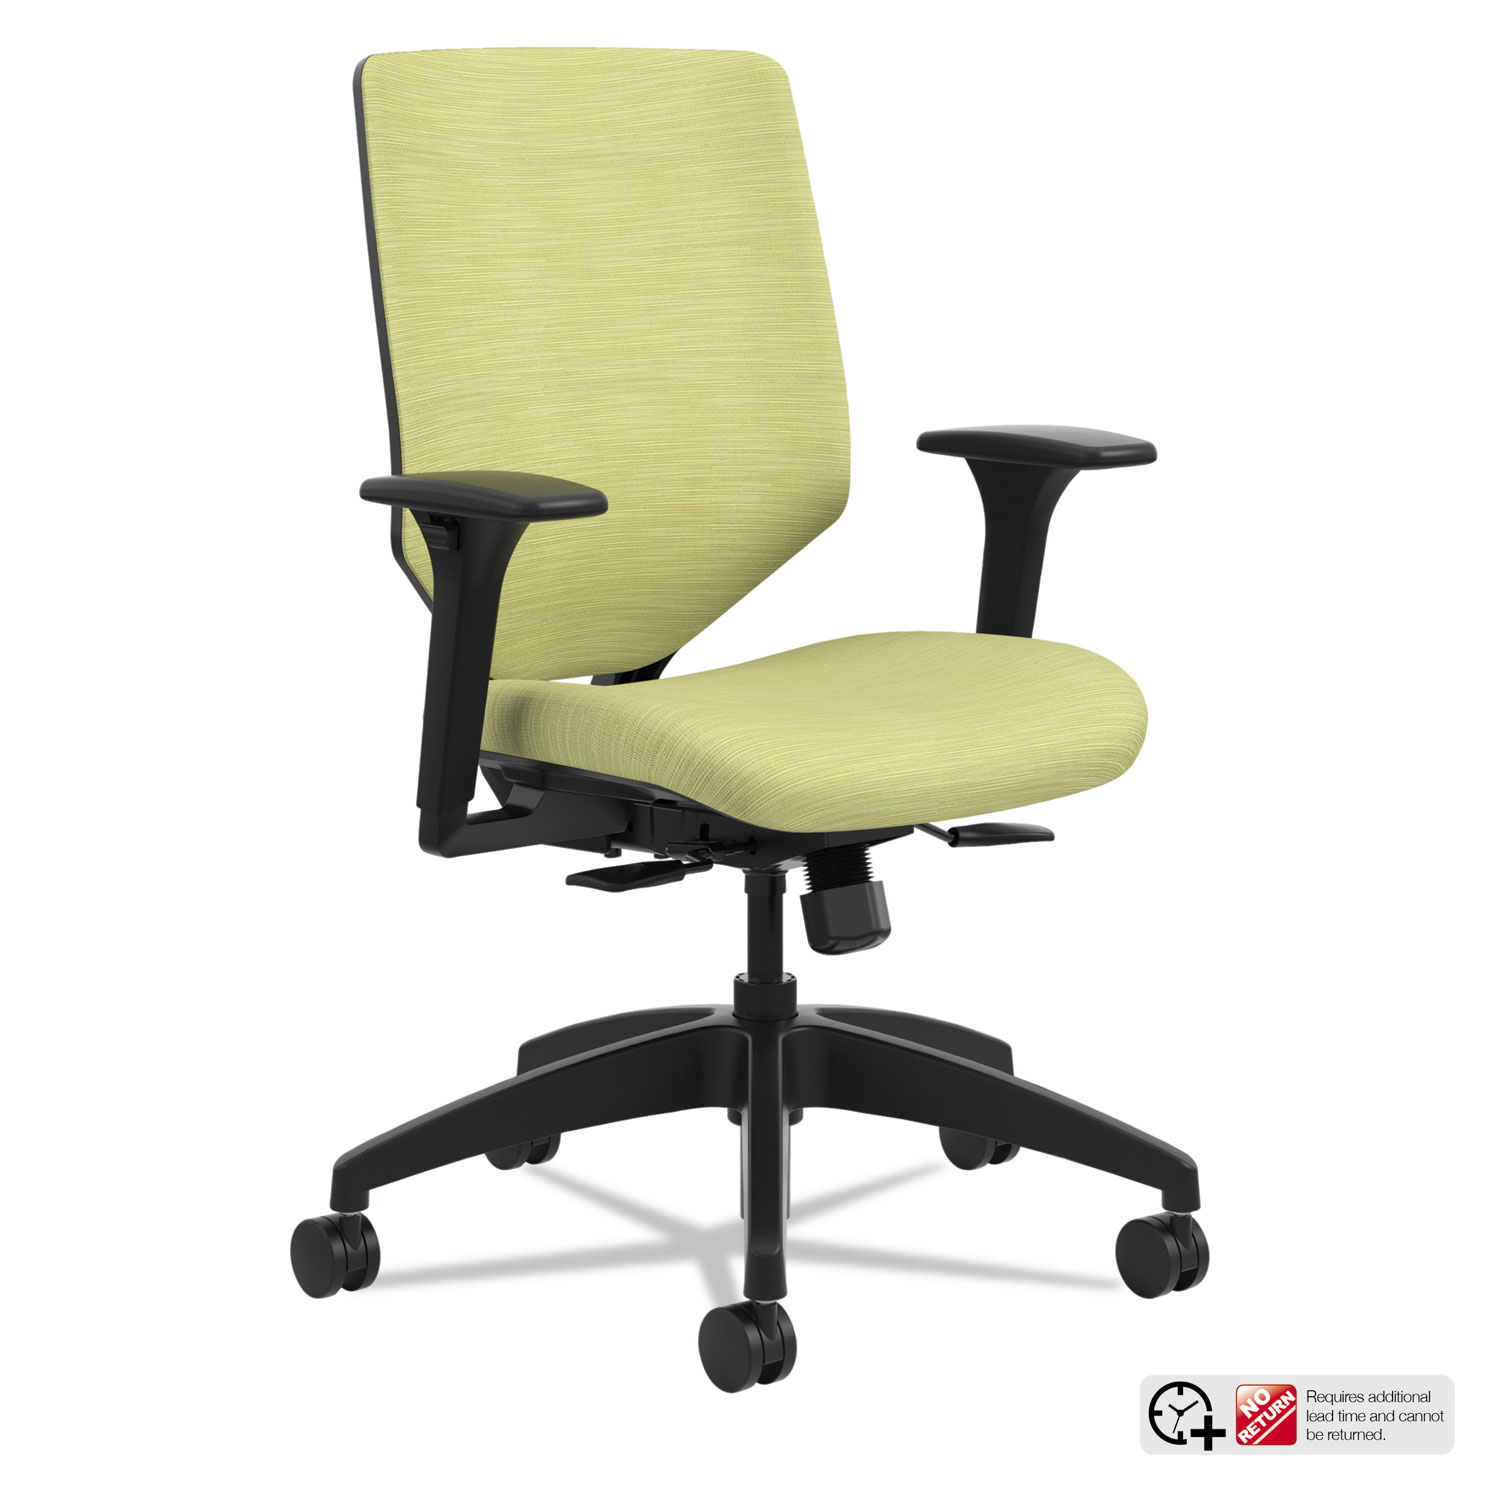  HON SVU1ACLC82TK Solve Series Upholstered Back Task Chair, Supports up to 300 lbs., Meadow Seat/Meadow Back, Black Base (HONSVU1ACLC82TK) 